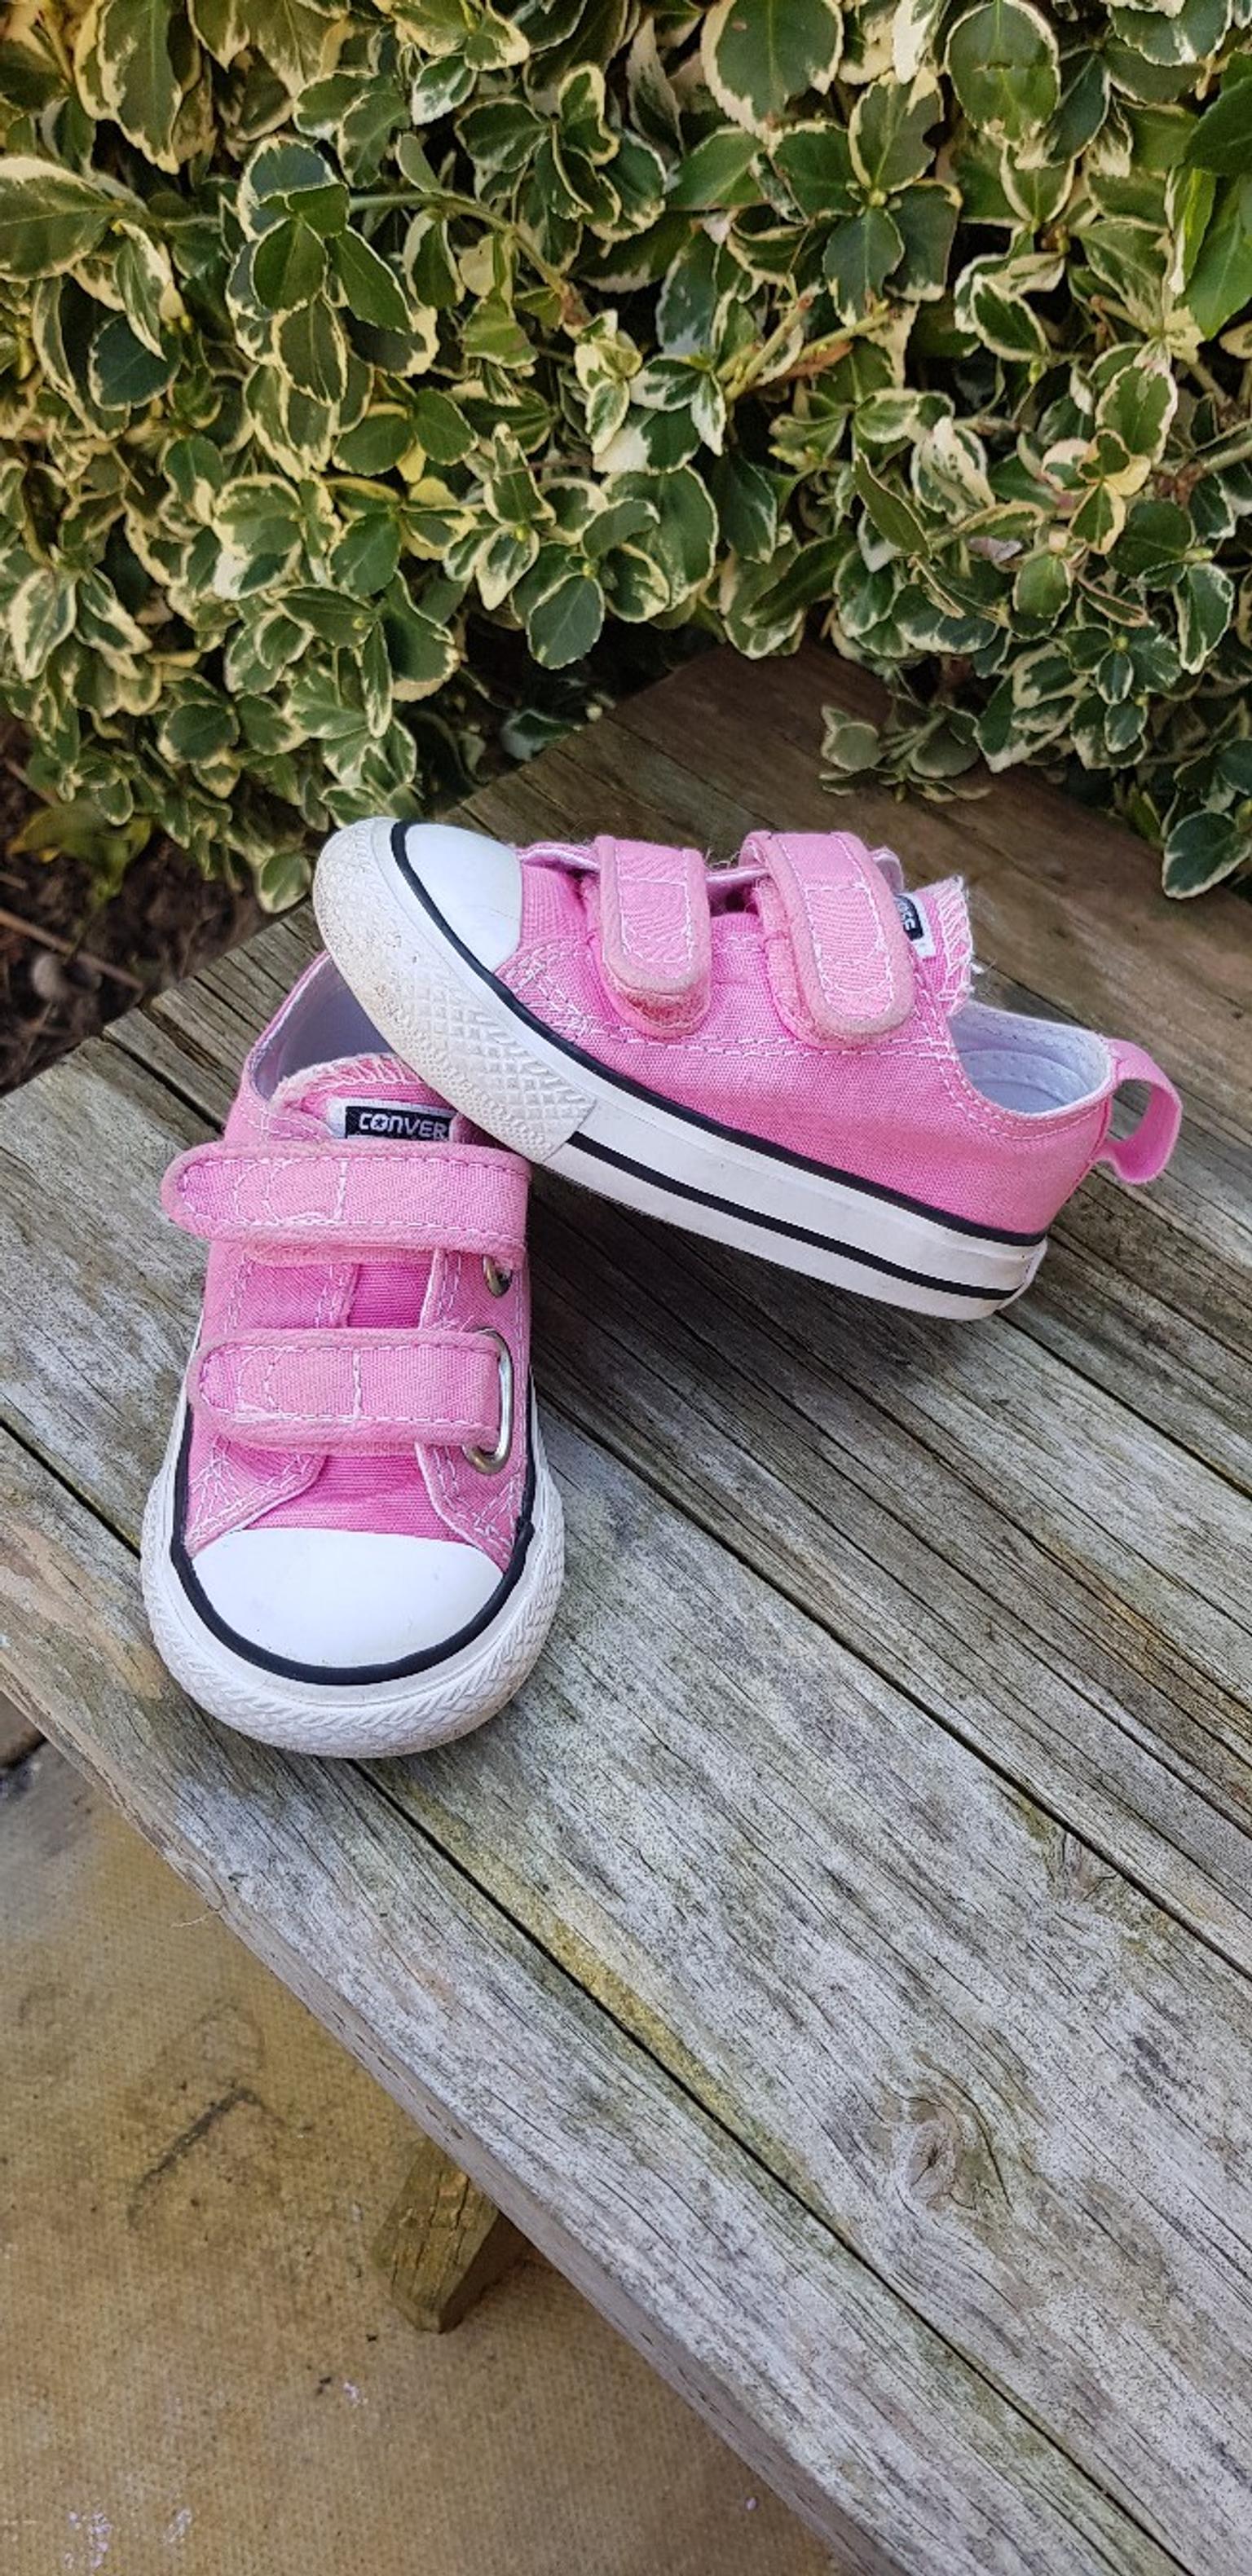 converse baby size 5